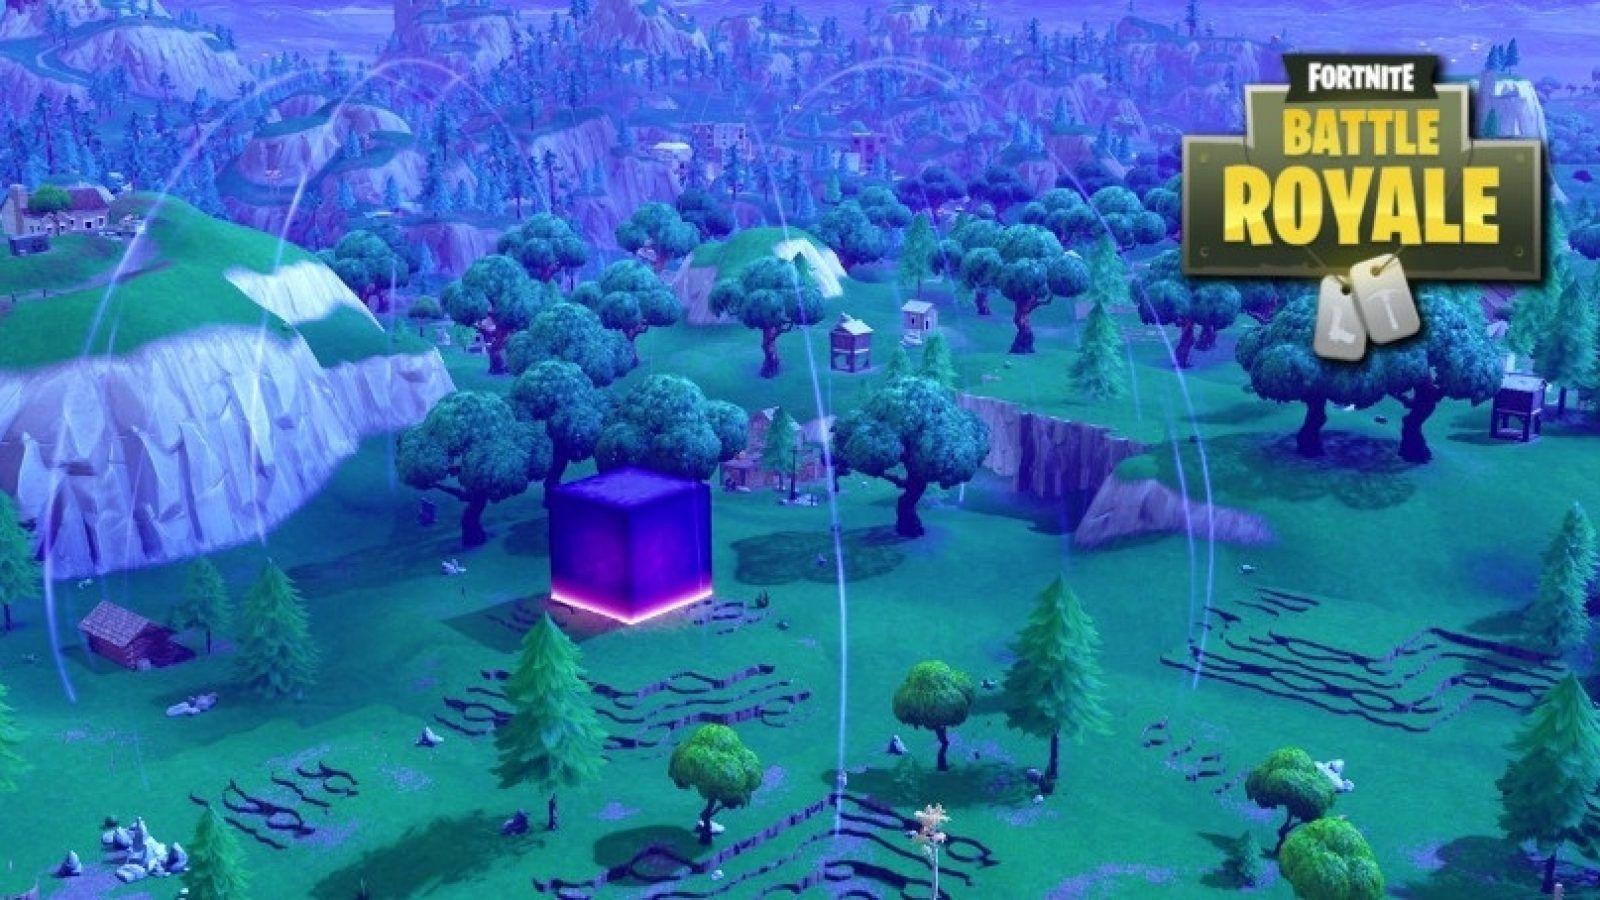 The Giant Cube In Fortnite Is Now Surrounded By A Low Gravity Force